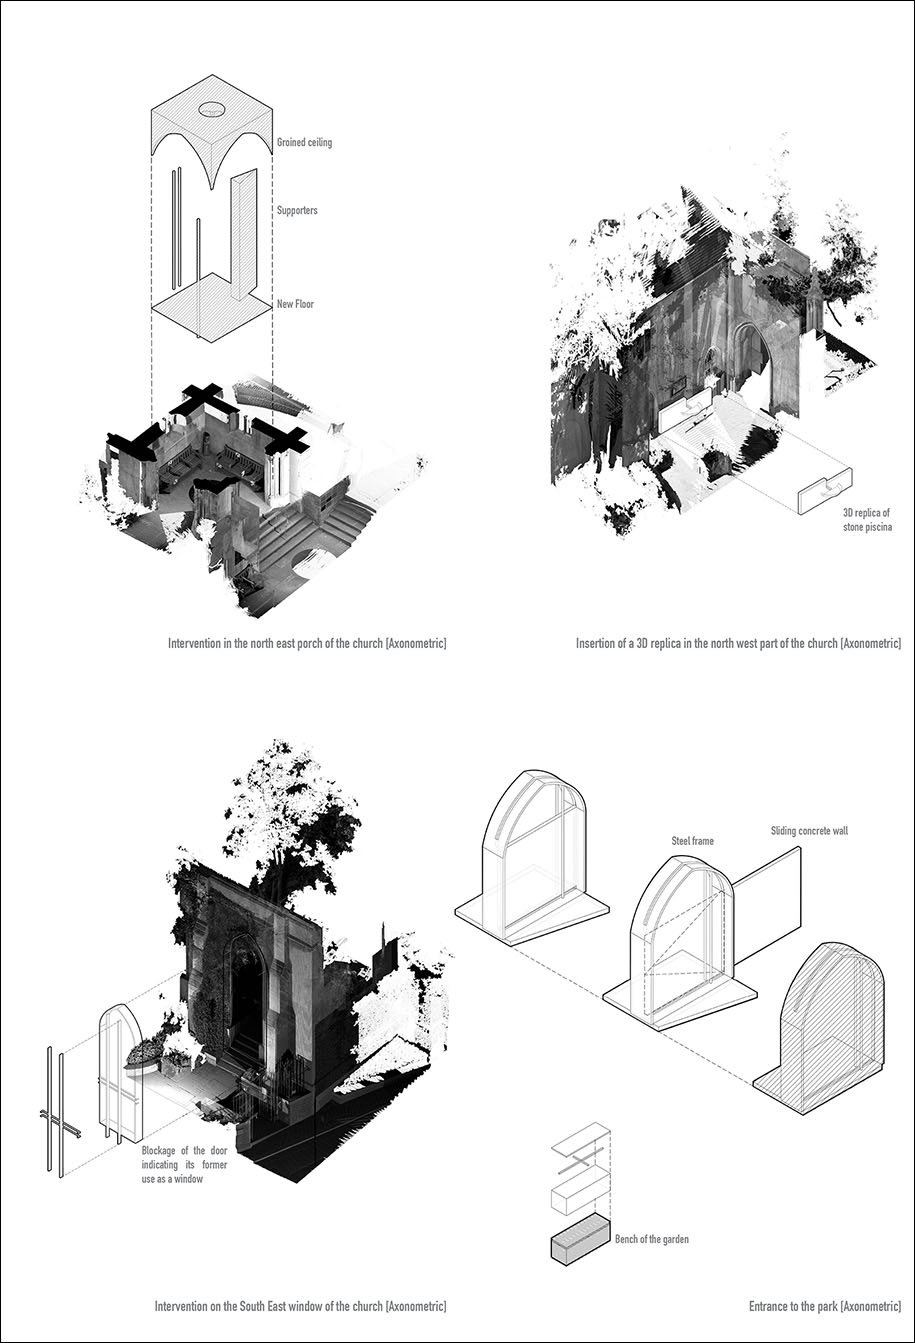 Fragments of Archiving, Tasos Theodorakakis, the Bartlett, the Bartlett School of Architecture, School of Architecture, UCL, University College London, Masters, MAHUE, MA Historic Urban Environments, Master project, Master's thesis